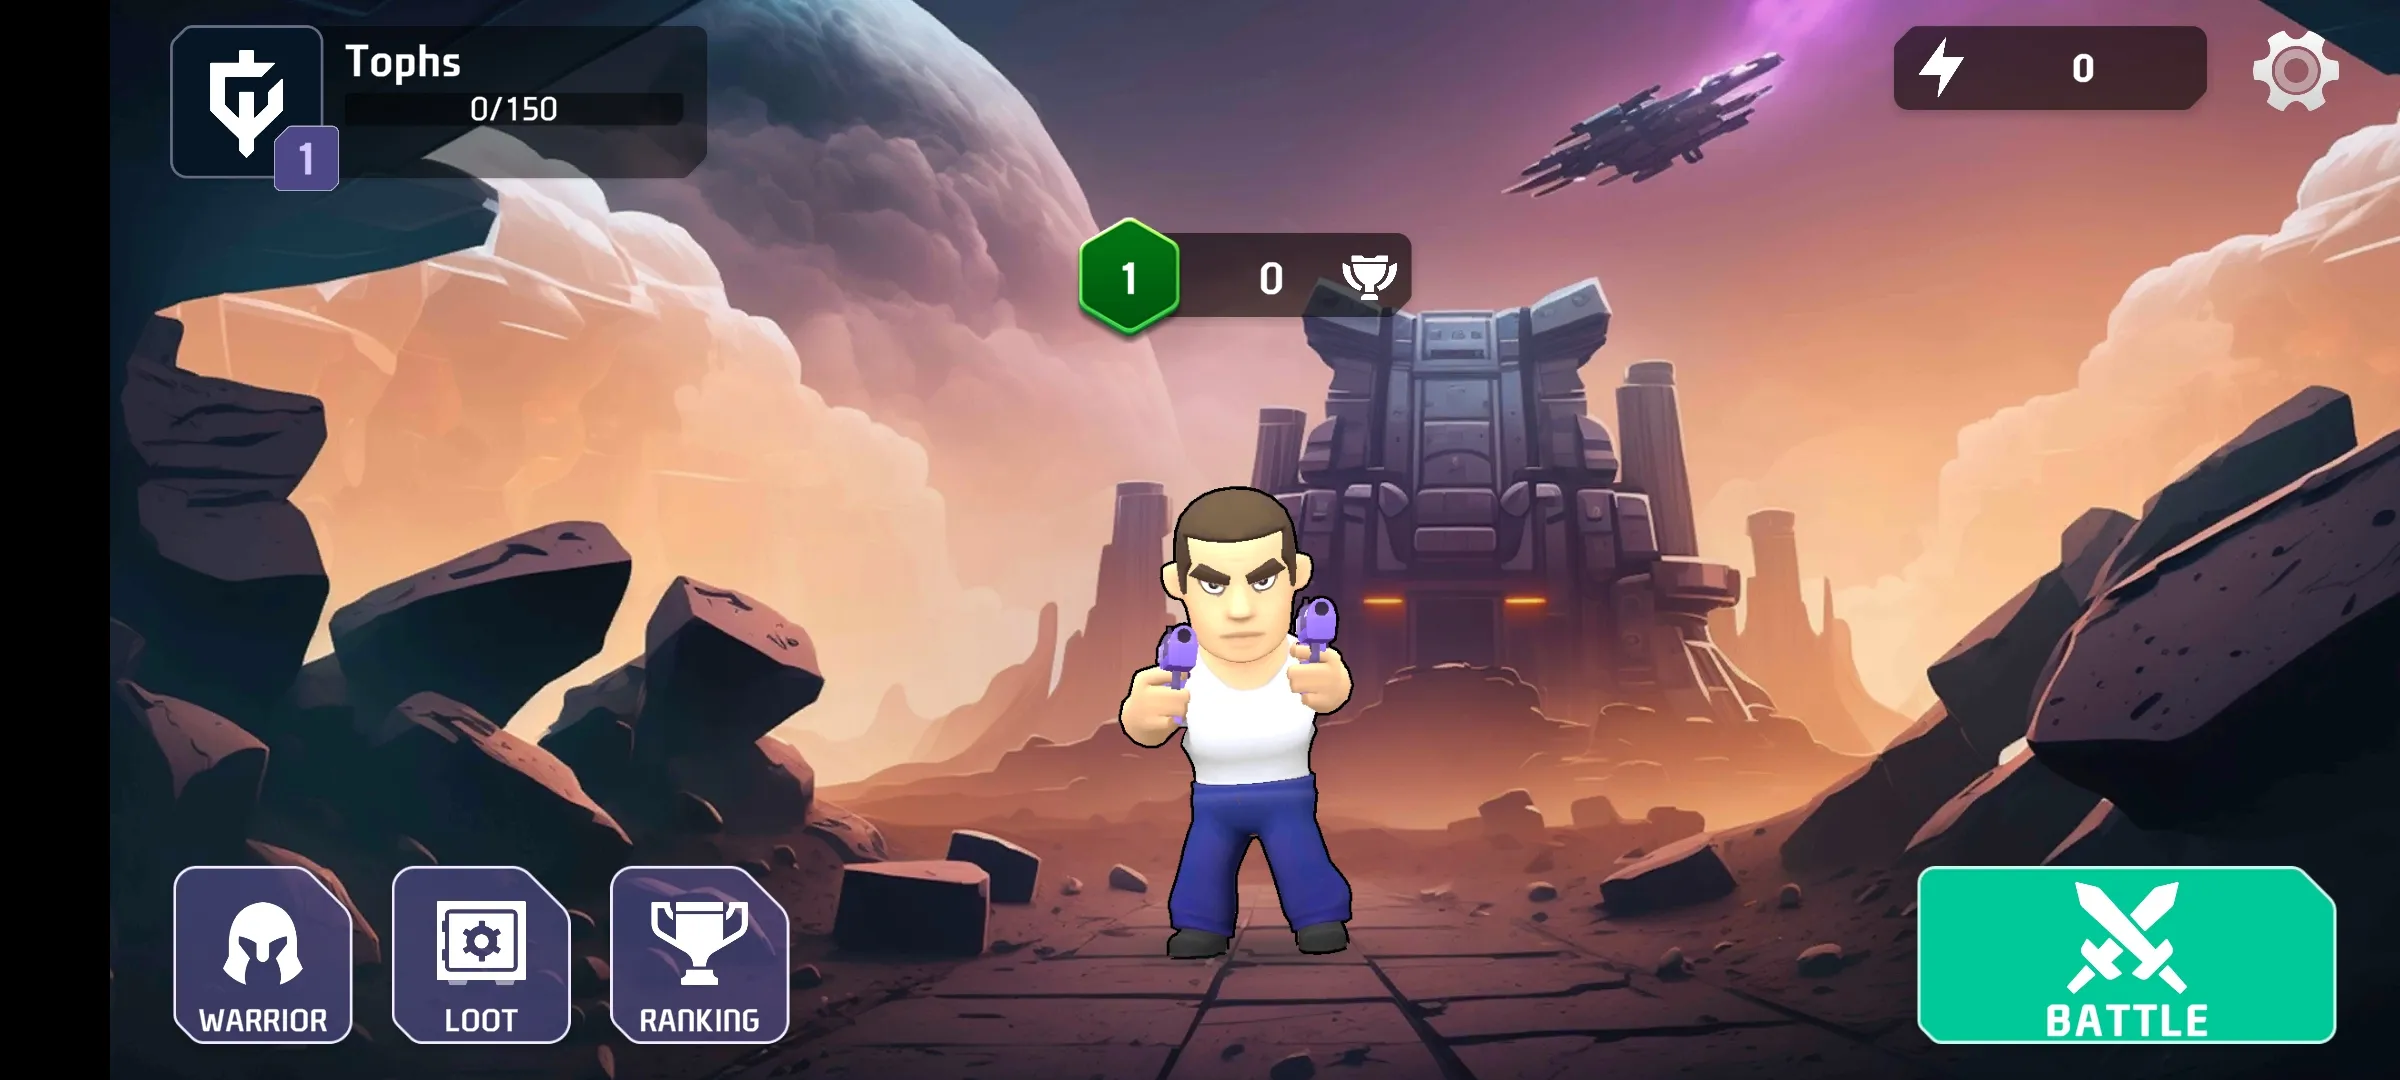 The homescreen in Galaxy Fight Club serves as the lobby upon opening the game, offering various interactive buttons that players can explore.